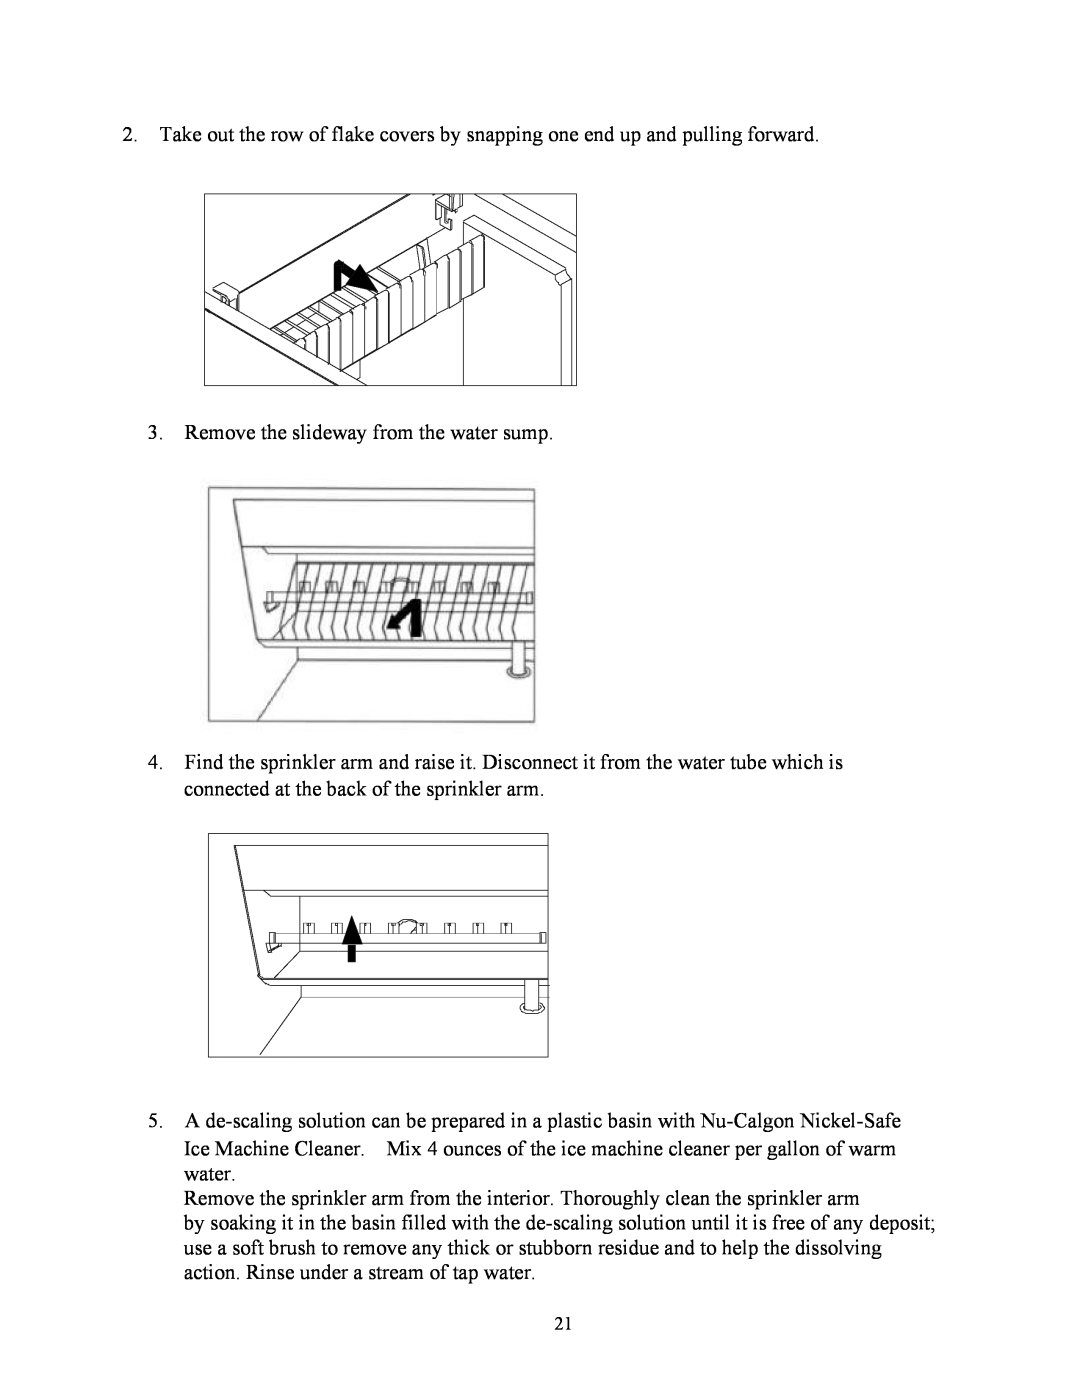 Summit BIM70 user manual Remove the slideway from the water sump 